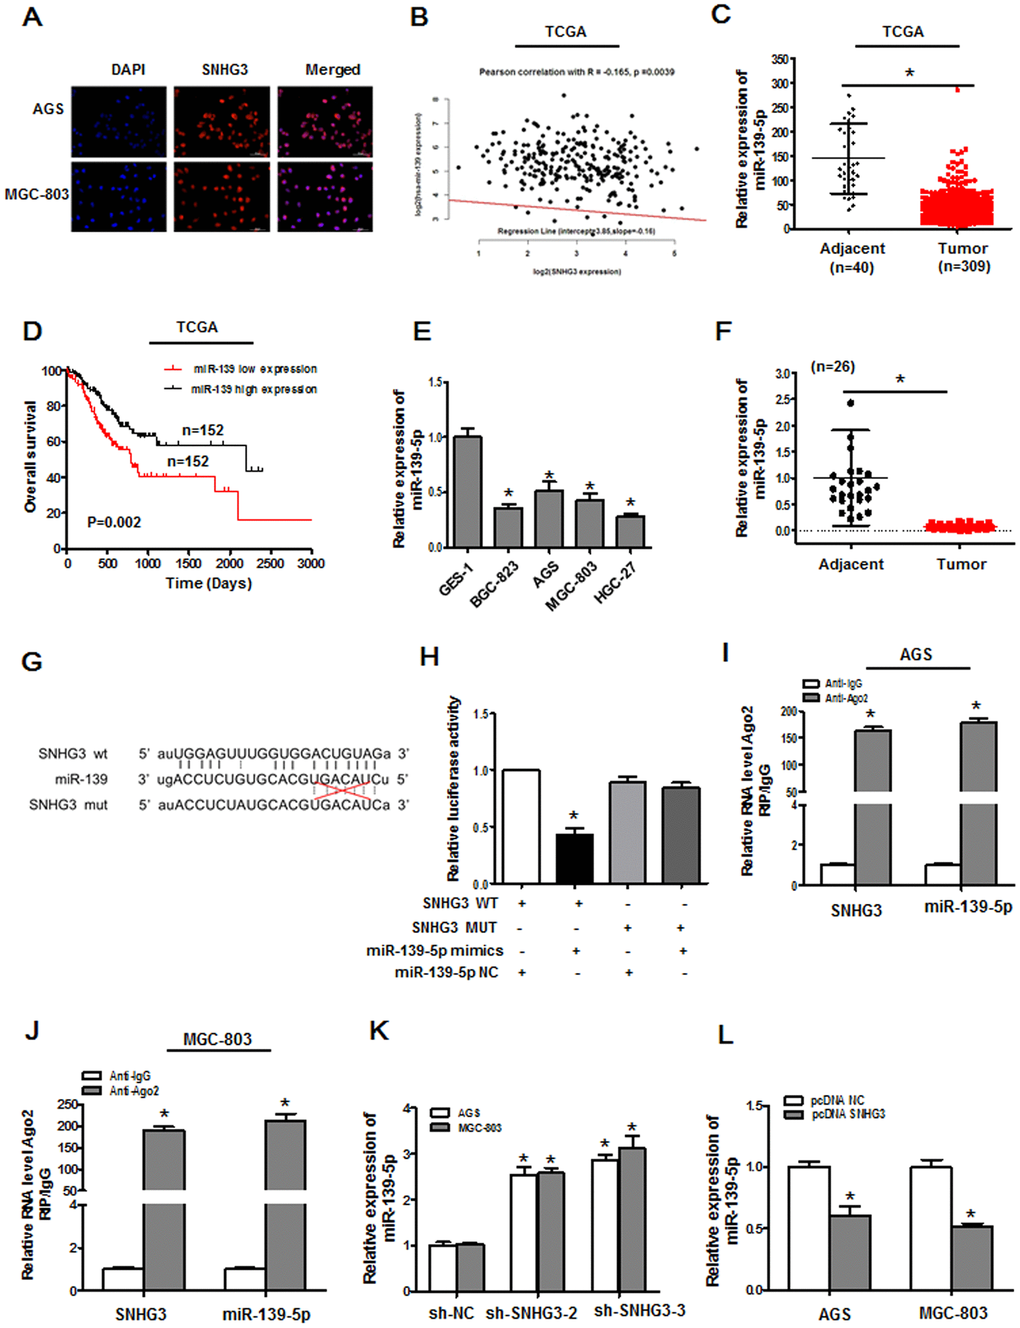 SNHG3 directly targets miR-139-5p in gastric cancer. (A) The localization of SNHG3 was assessed via an RNA FISH assay in AGS and MGC-803 cells. (B) Correlations between the expression of miR-139-5p and SNHG3 in TCGA database samples were assessed via Pearson’s correlation analyses, R=-0.165, P=0.0039. (C) miR-139-5p expression levels in gastric cancer tissues from the TCGA database, *PD) The overall survival of gastric cancer patients in the TCGA database was compared as a function of miR-139-5p expression levels (high vs. low; log-rank, P=0.002). (E) qPCR was used to measure miR-139-5p expression in GES-1, BGC-823, AGS, MGC-803, and HGC-27 cells. *PF) qPCR was used to assess miR-139-5p expression in 26 pairs of gastric cancer tumor and paracancerous tissues, *PG) Predicted sequence complementarity between miR-139-5p and SNHG3. (H) SNHG3 and miR-139-5p binding in 293T cells was assess via luciferase reporter assay following co-transfection with SNHG3 WT or SNHG3 MUT and miR-NC or miR-139-5p mimics. *PI, J) Interactions between miR-139-5p and SNHG3 were assessed via RIP assays, *PK) miR-139-5p expression was assessed in AGS and MGC-803 cells following sh-SNHG transfection. *PL) miR-139-5p expression was quantified in AGS and MGC-803 cells following pcDNA3.1-SNHG3 transfection. *P